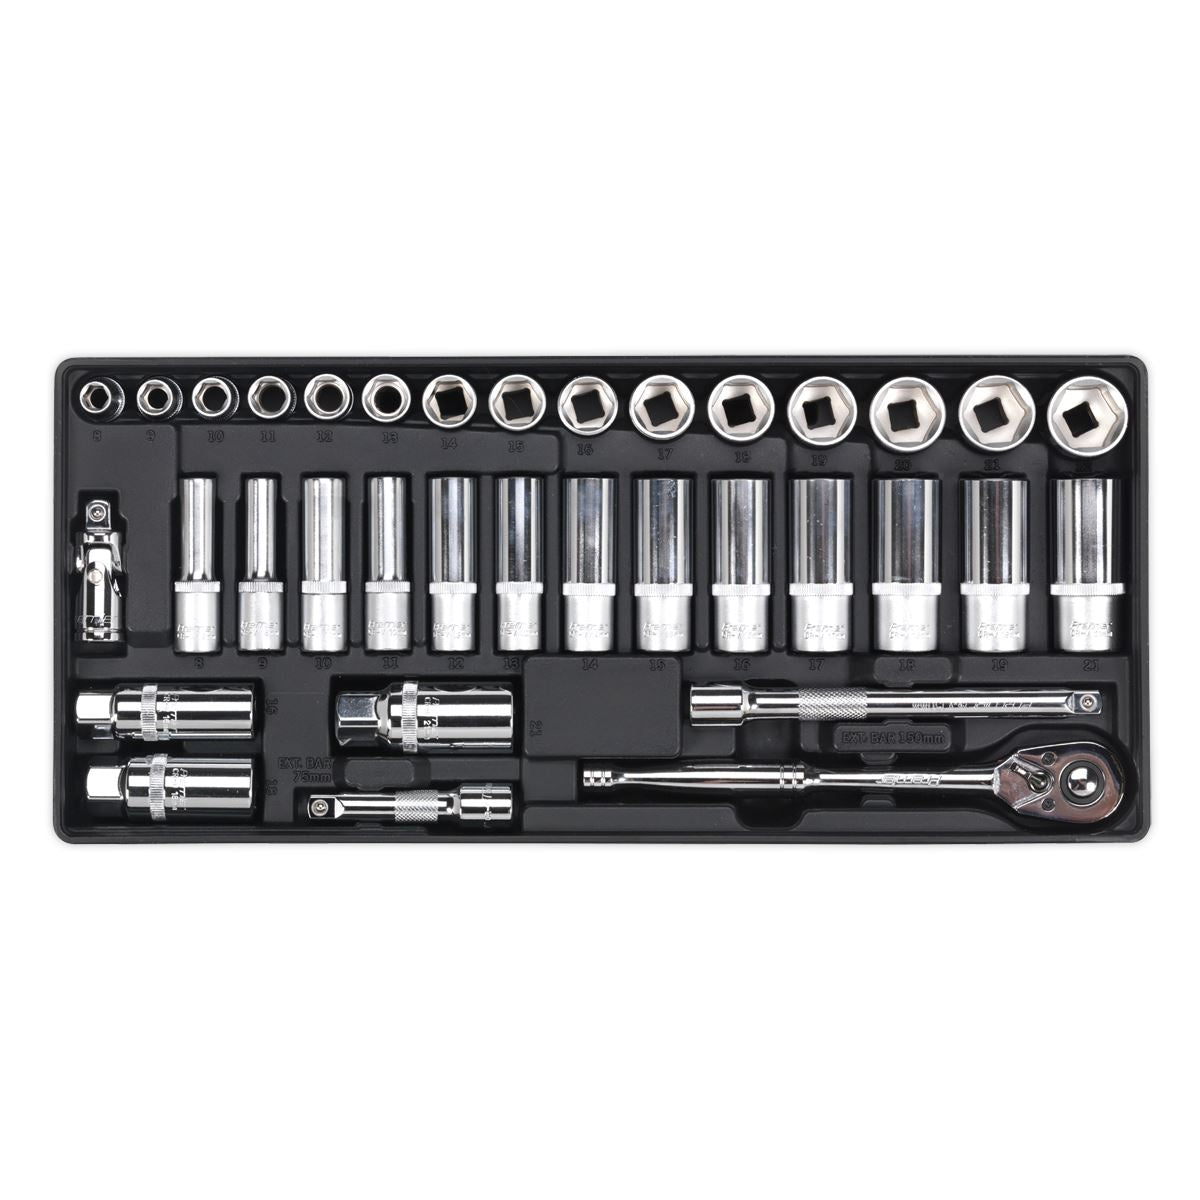 Sealey Premier Tool Tray with Socket Set 35pc 3/8"Sq Drive